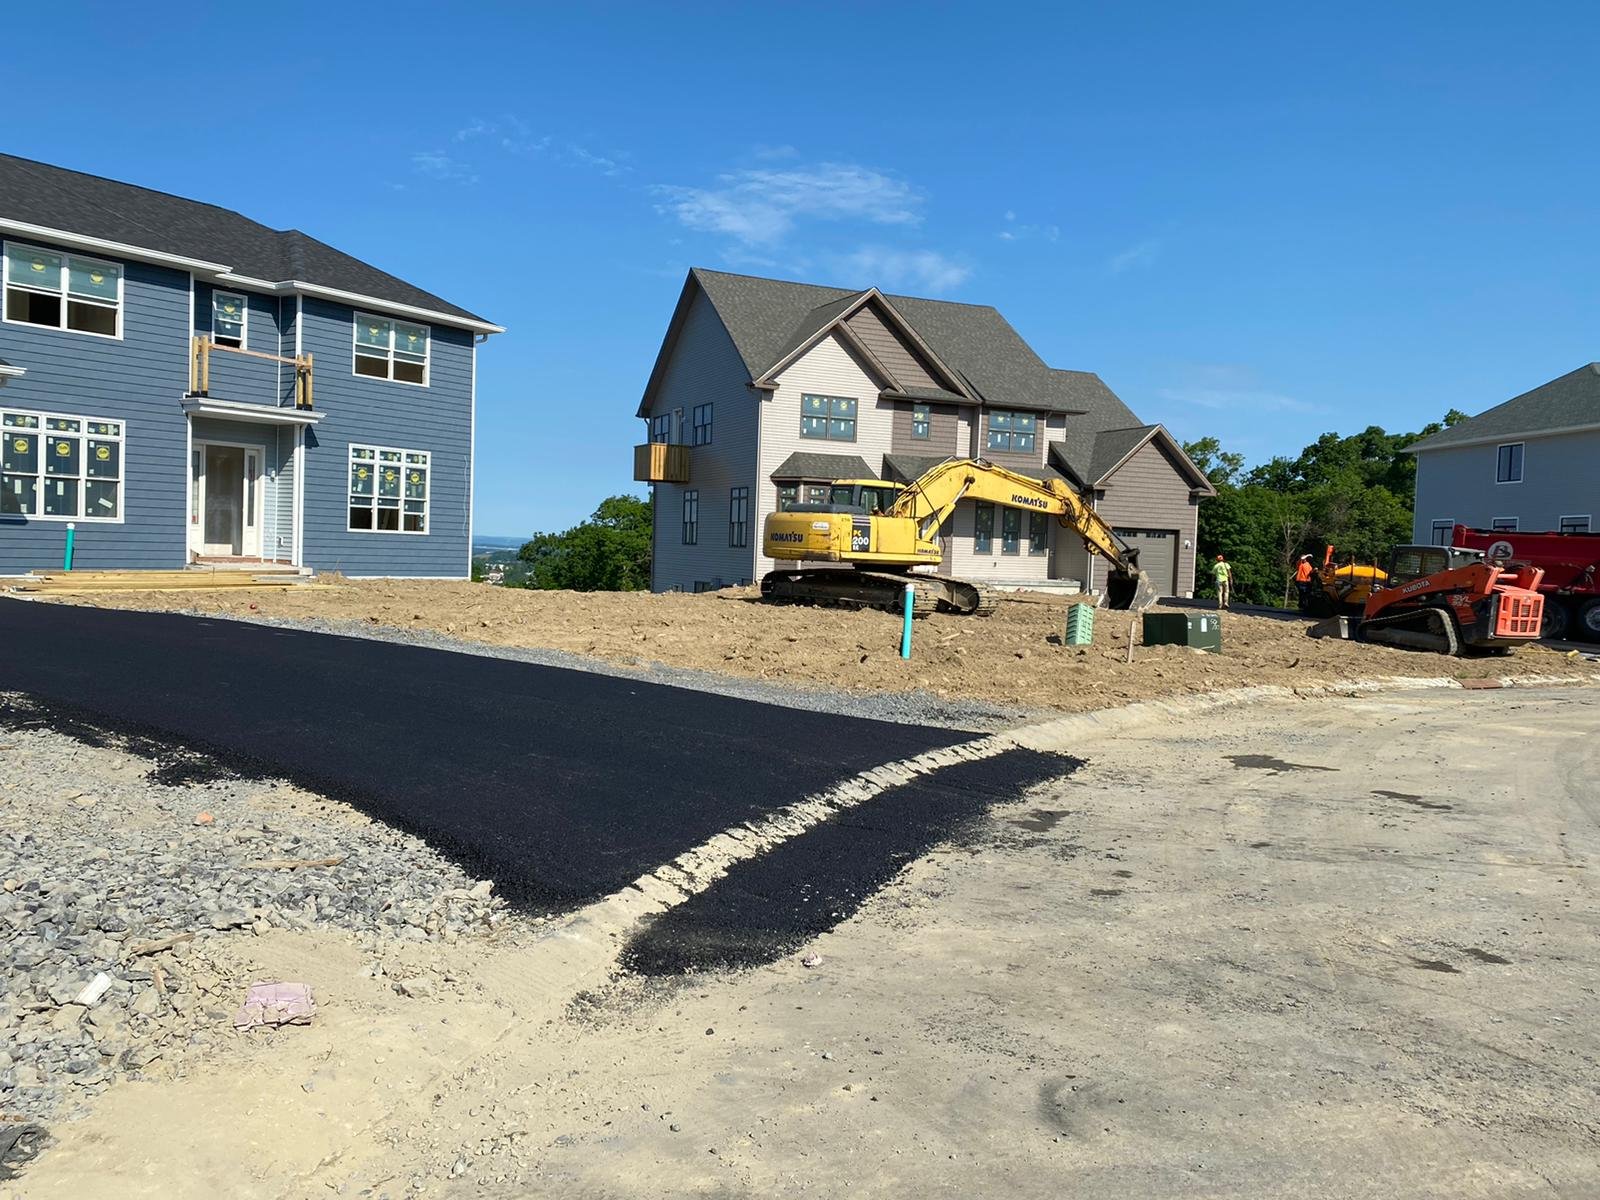 Parking Lot Paving Contractor